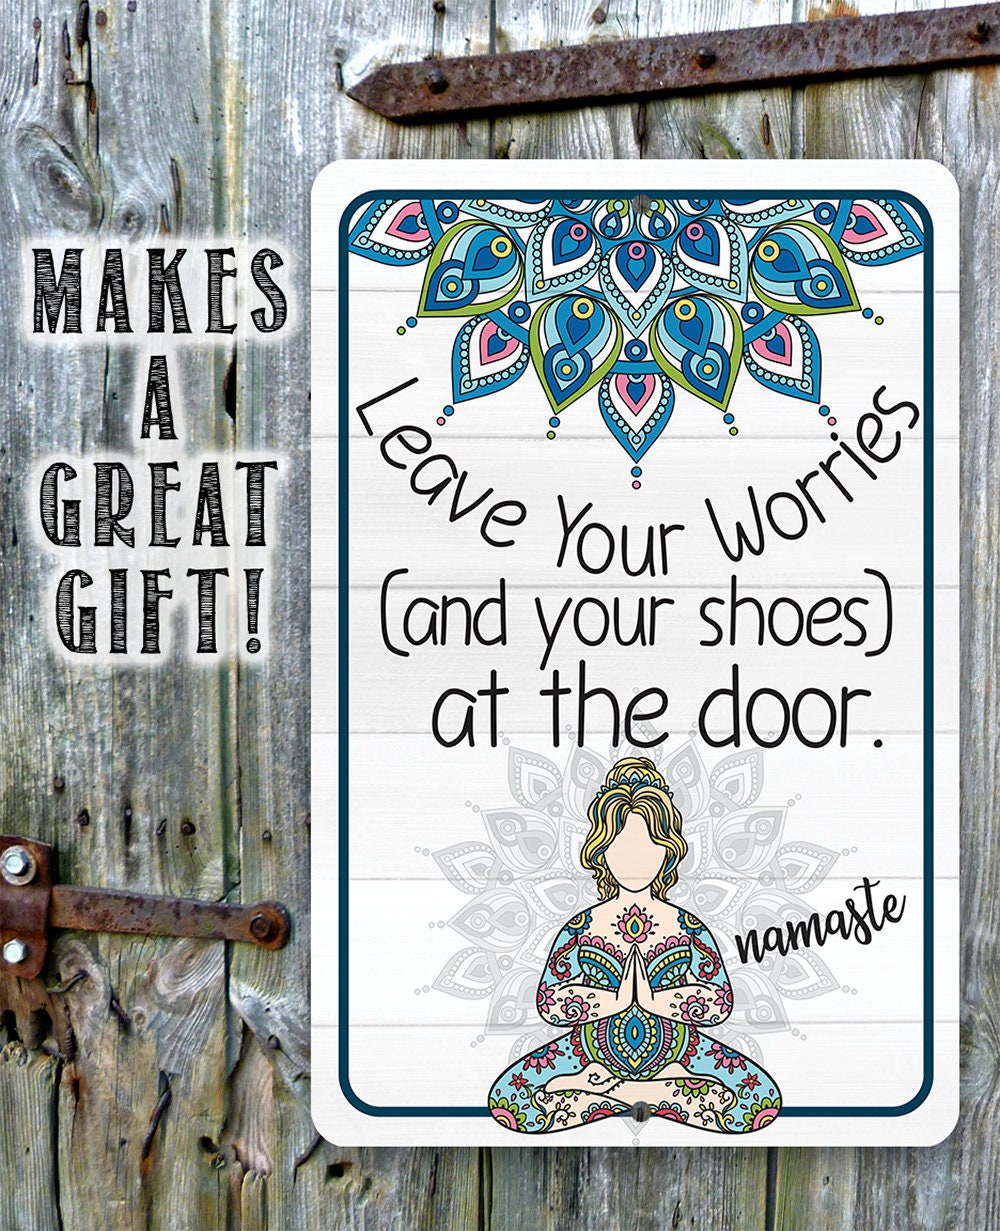 Leave Your Worries and Your Shoes at the Door - Namaste - Metal Sign Metal Sign Lone Star Art 